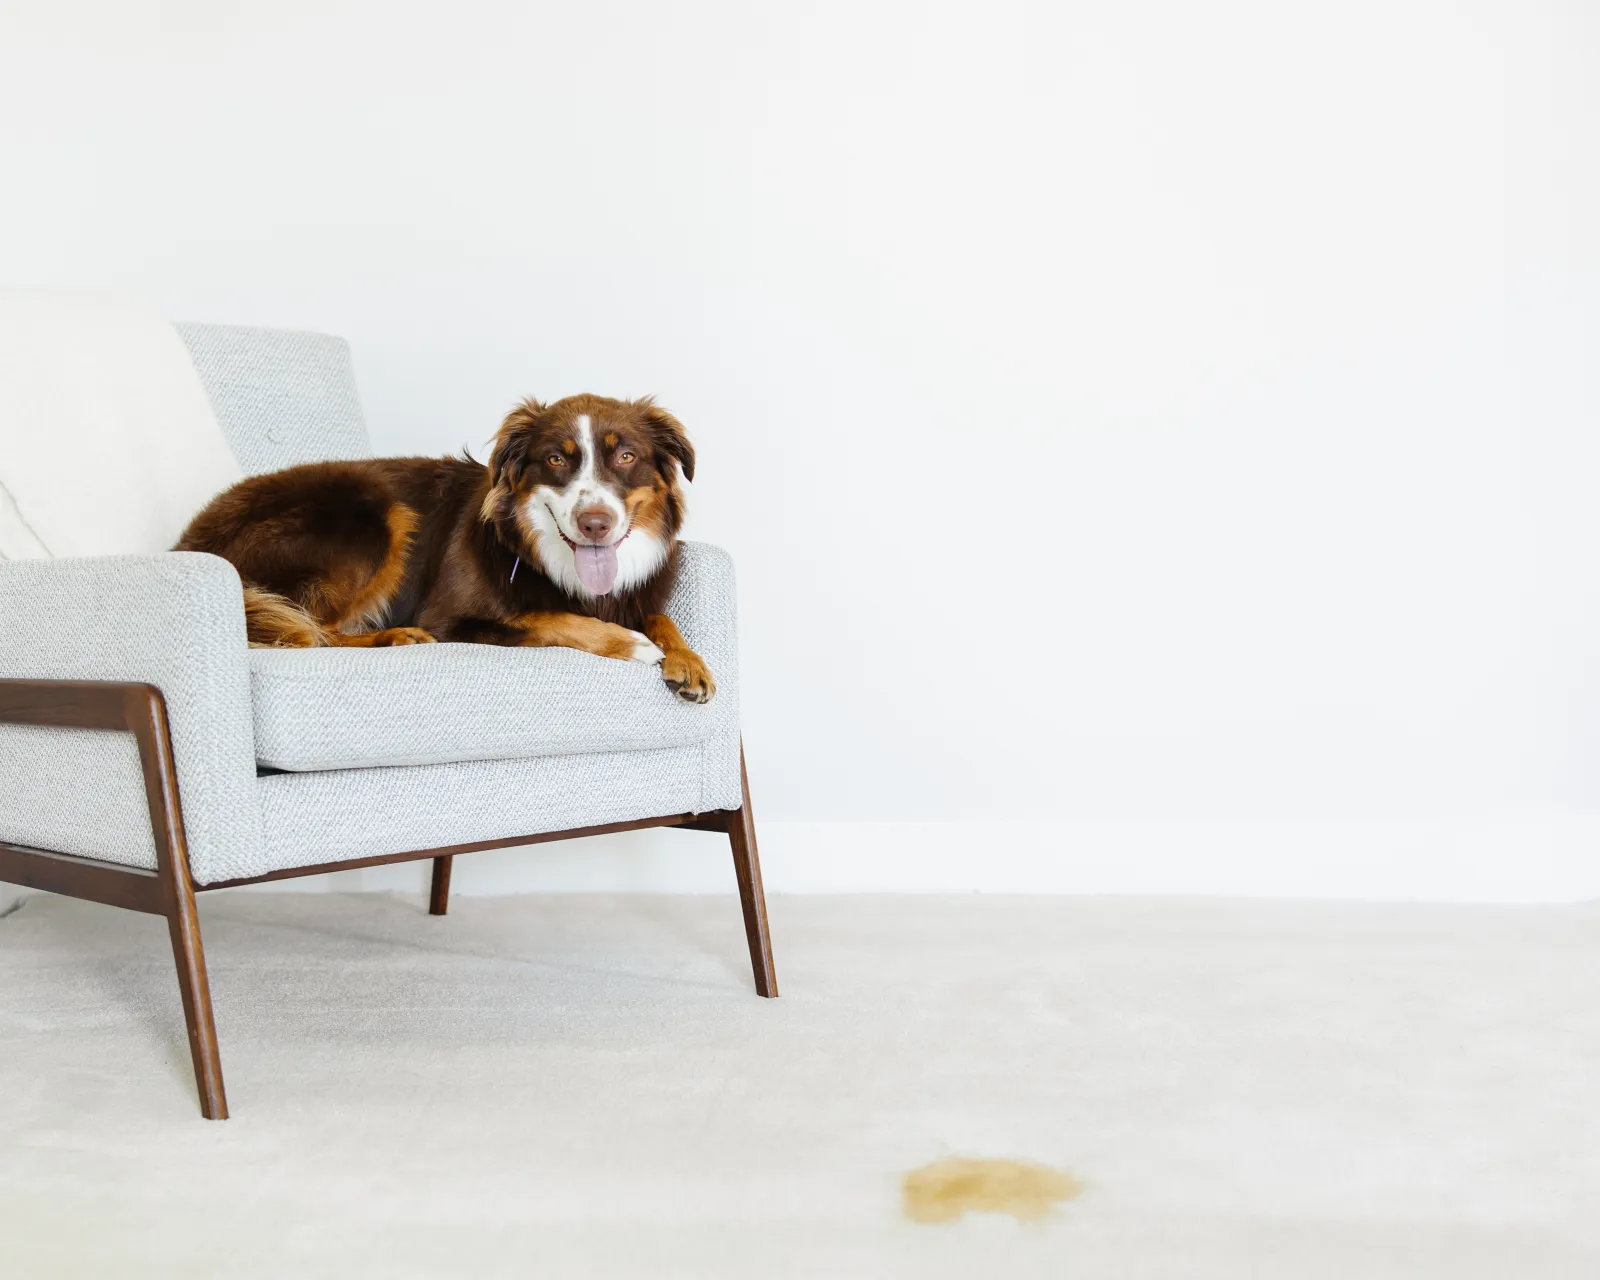 fluffy brown dog sitting in a gray chair with a yellow pee spot on the white carpet in front of the chair